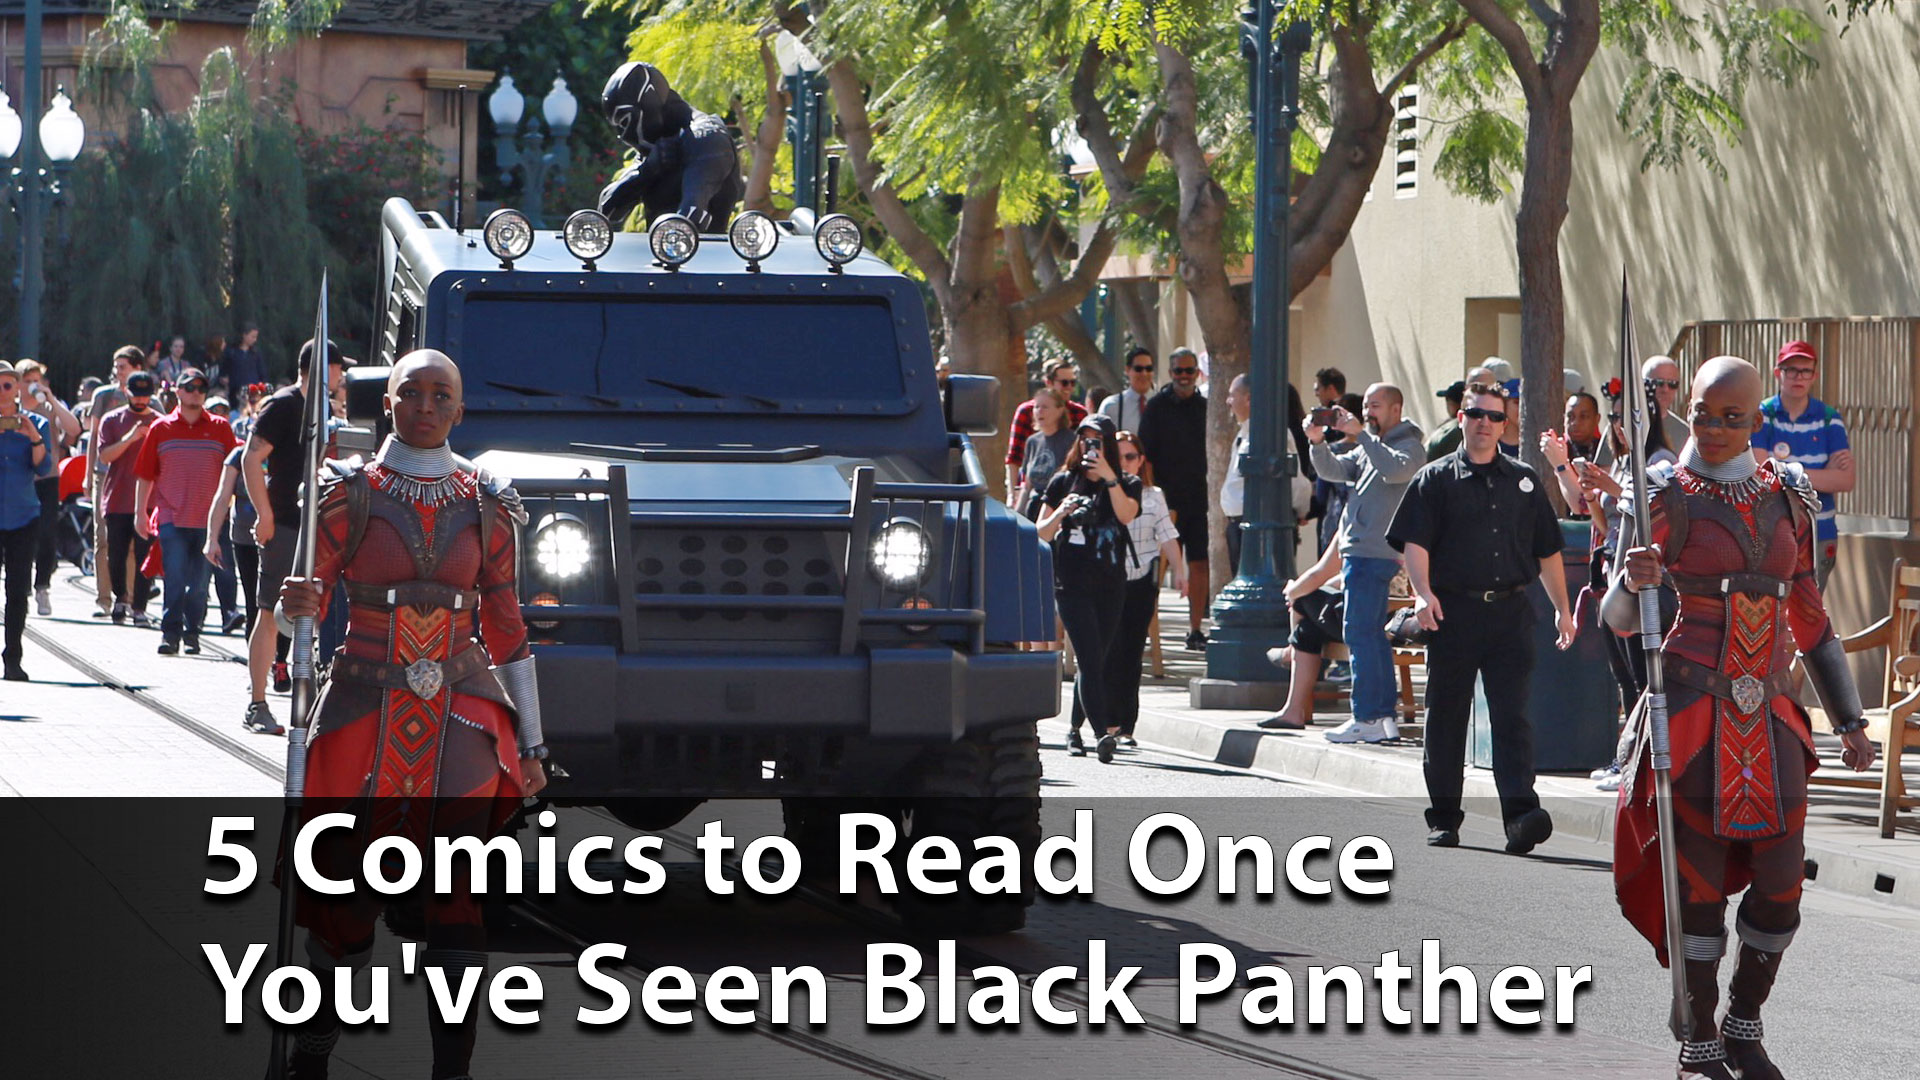 5 Comics to Read Once You’ve Seen Black Panther